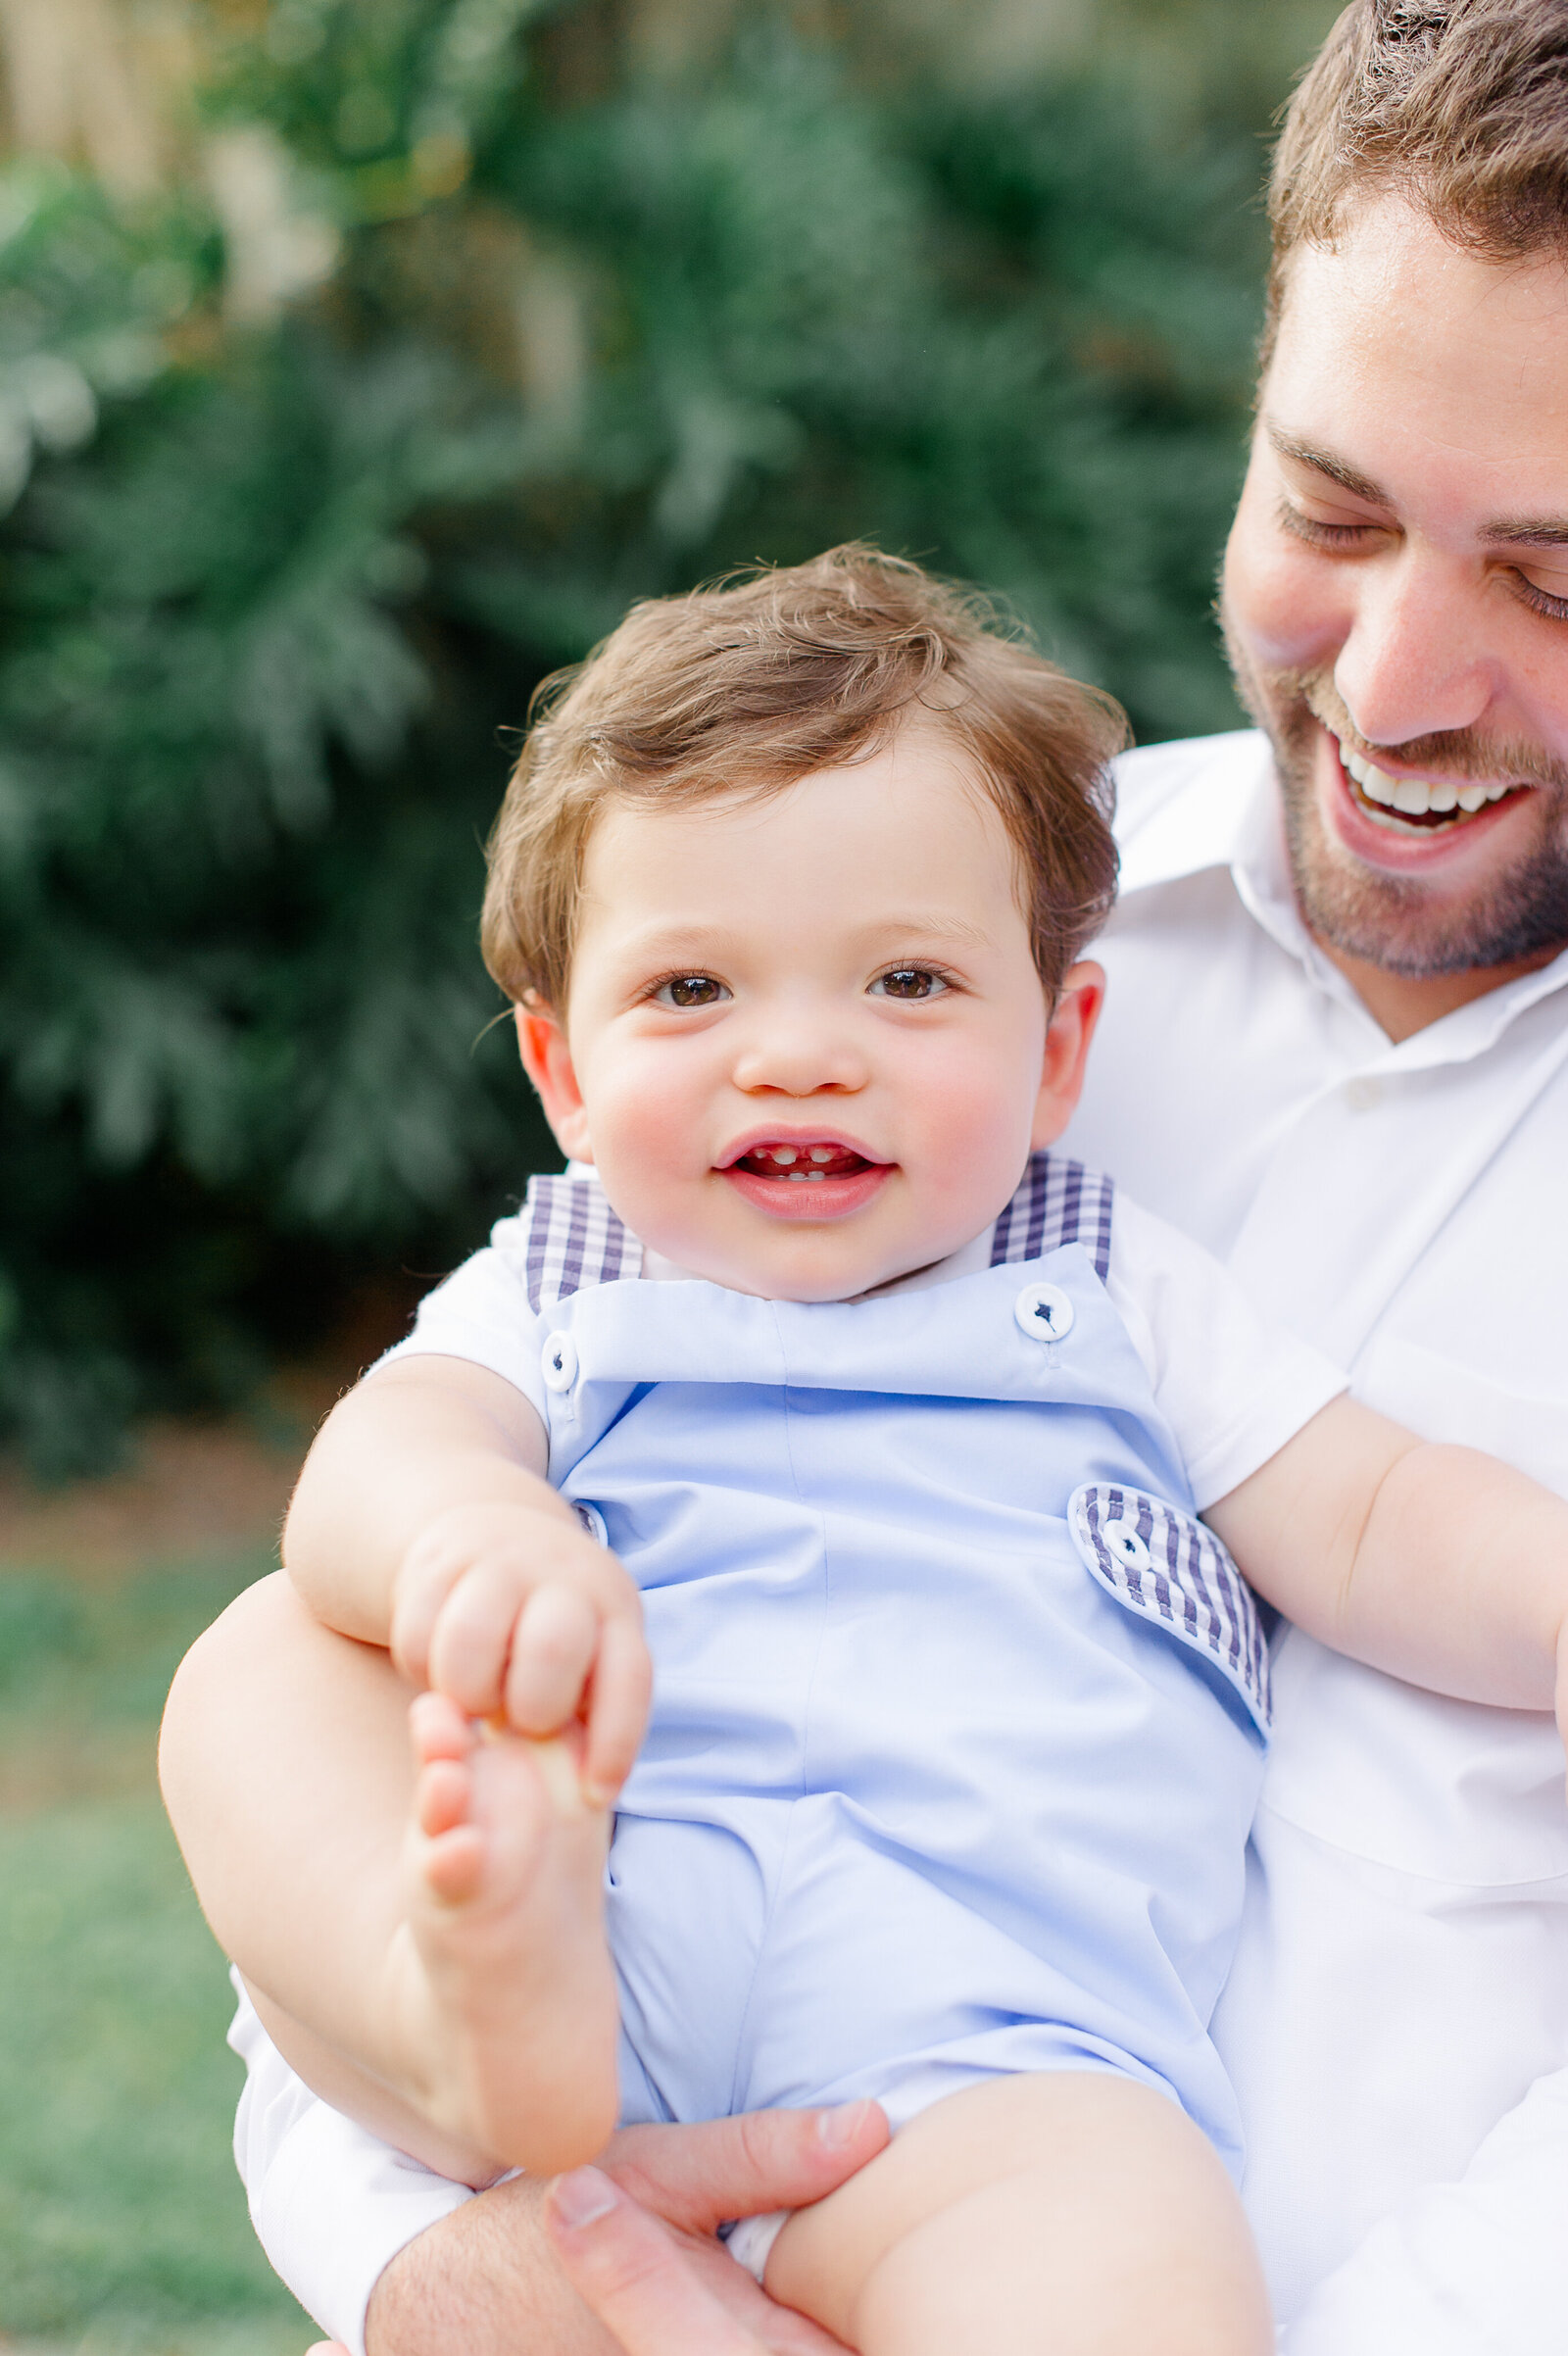 Close up of dad holding young boy wearing blue smiling at the camera